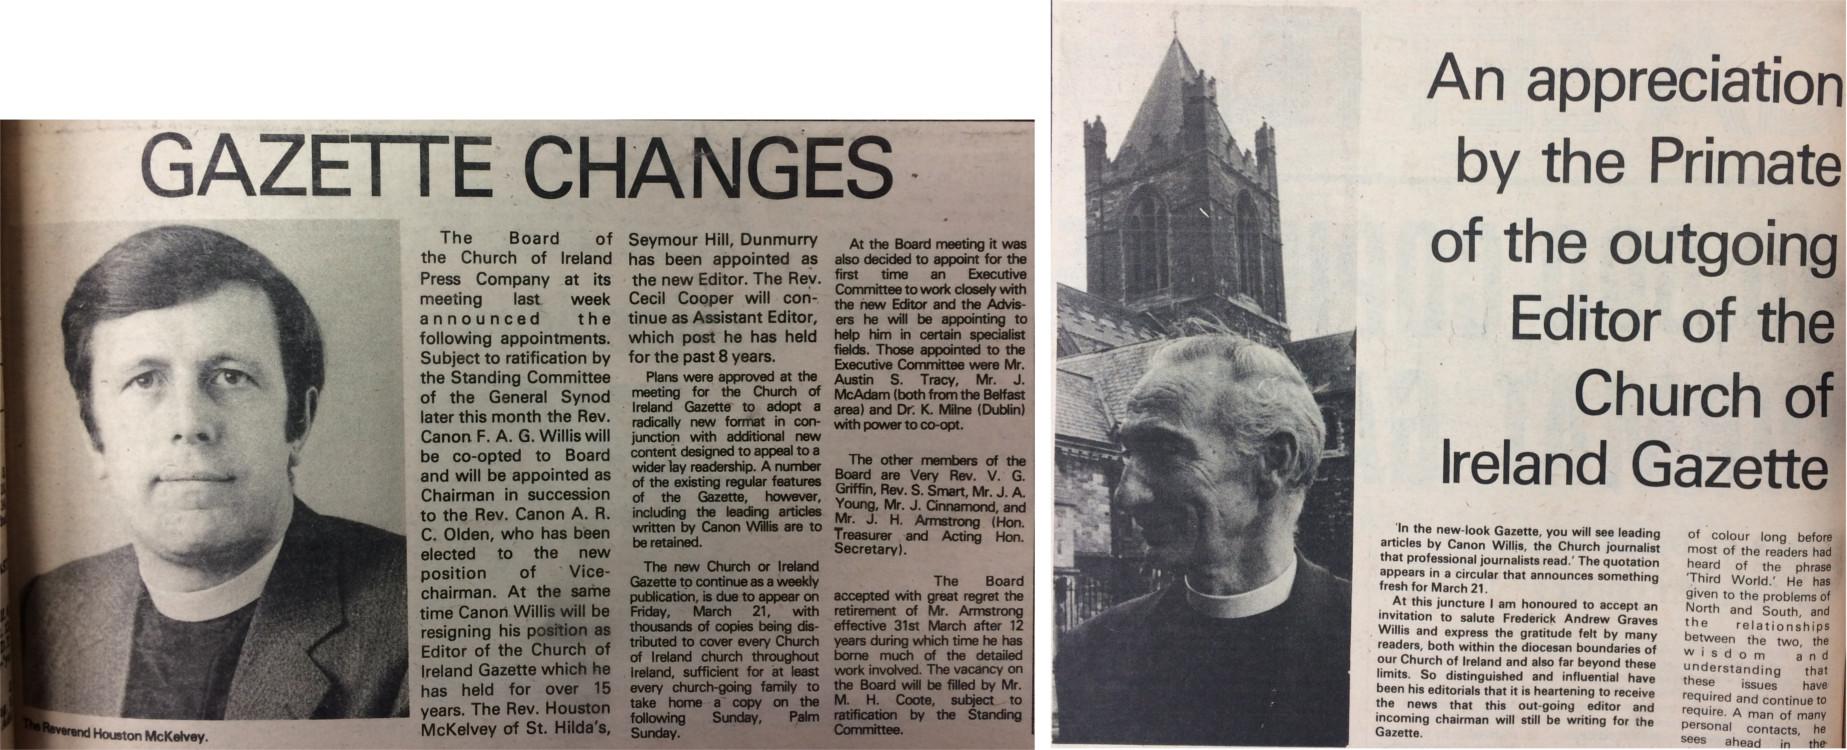 The Revd Houston McKelvey is introduced as the Gazette's new editor in the 14 February 1975 edition, while an appreciation of the outgoing editor,  Canon F.A.G. (Andy) Willis, appears in the 21 March 1975 edition